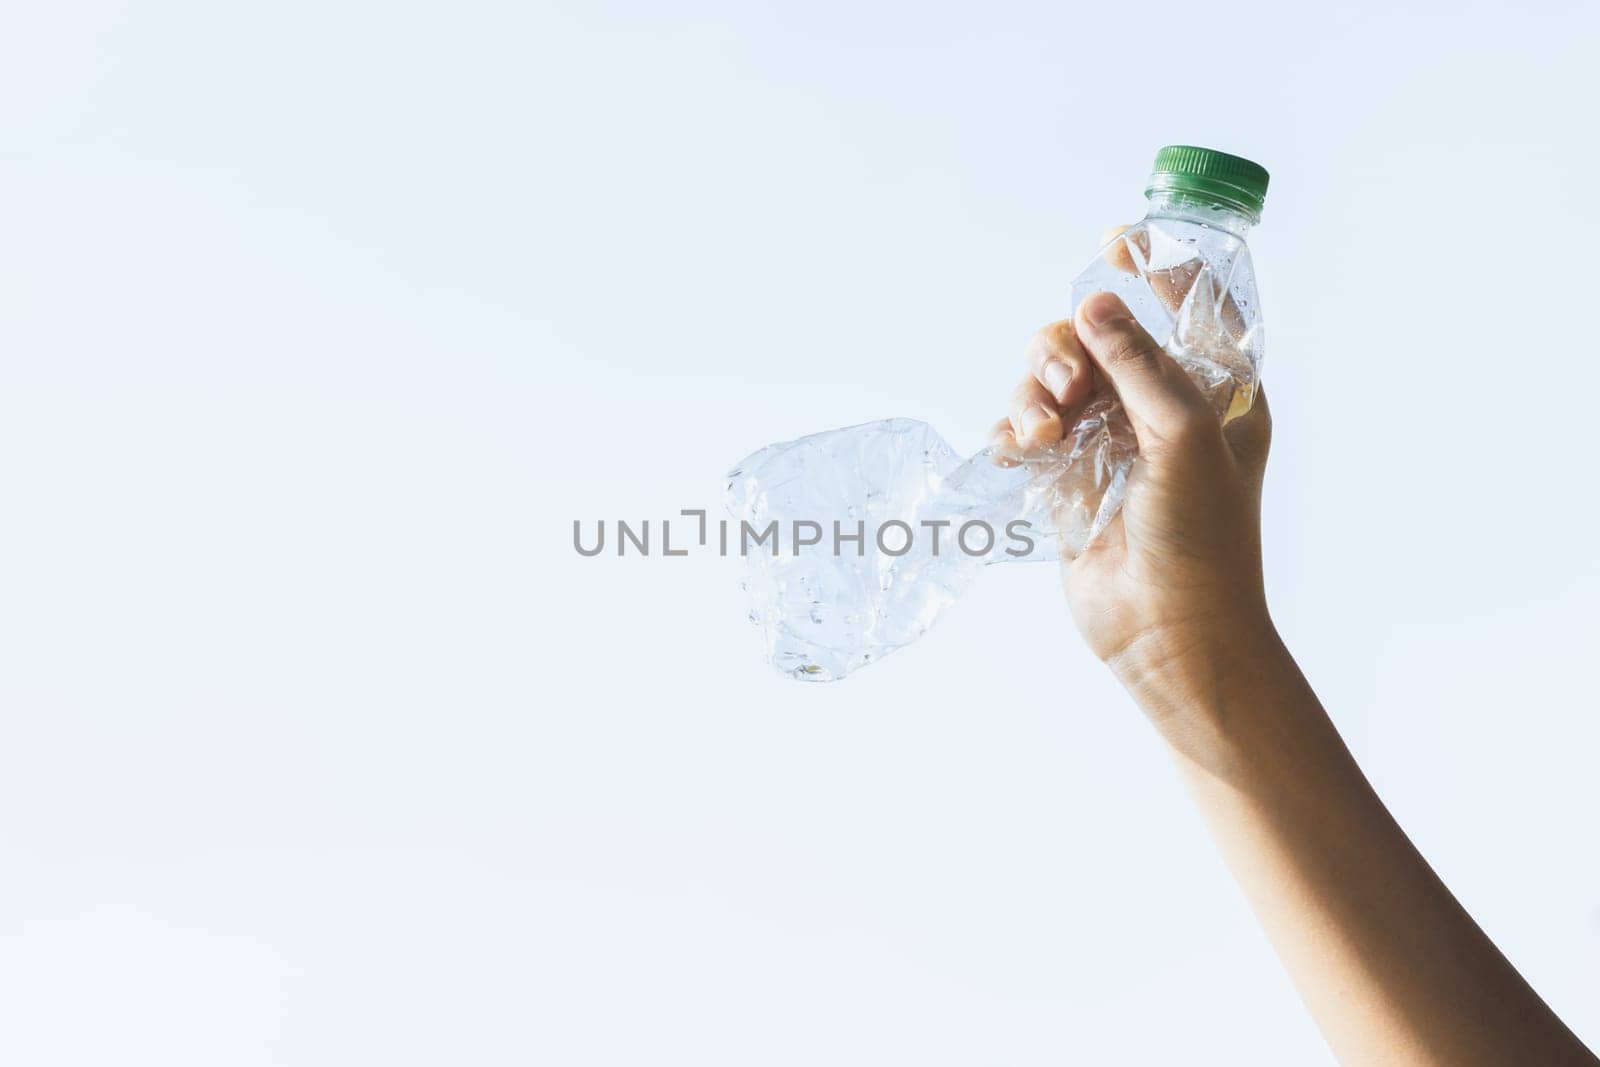 Recyclable can waste held in hand up on sky isolated background. Gyre by biancoblue